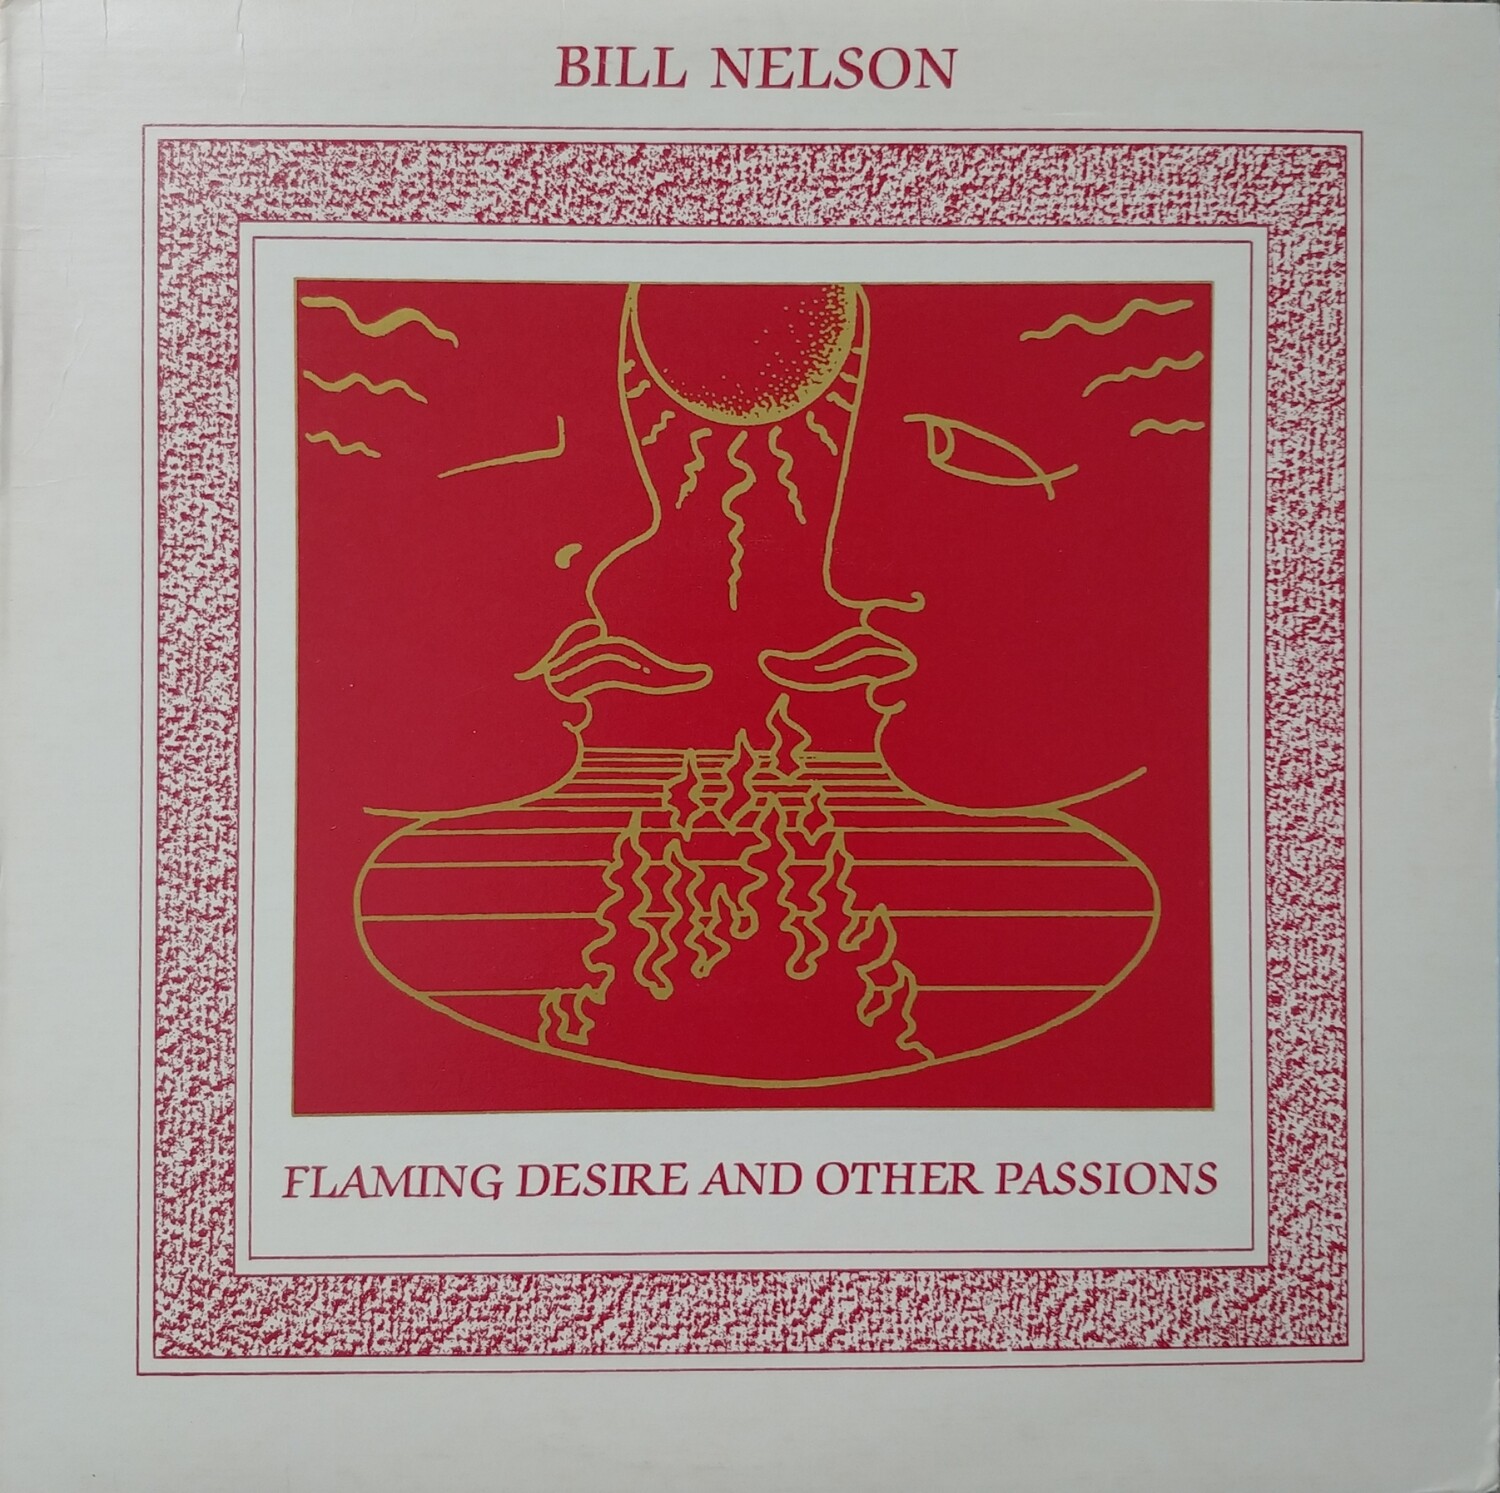 Bill Nelson - Flaming Desire and other passions